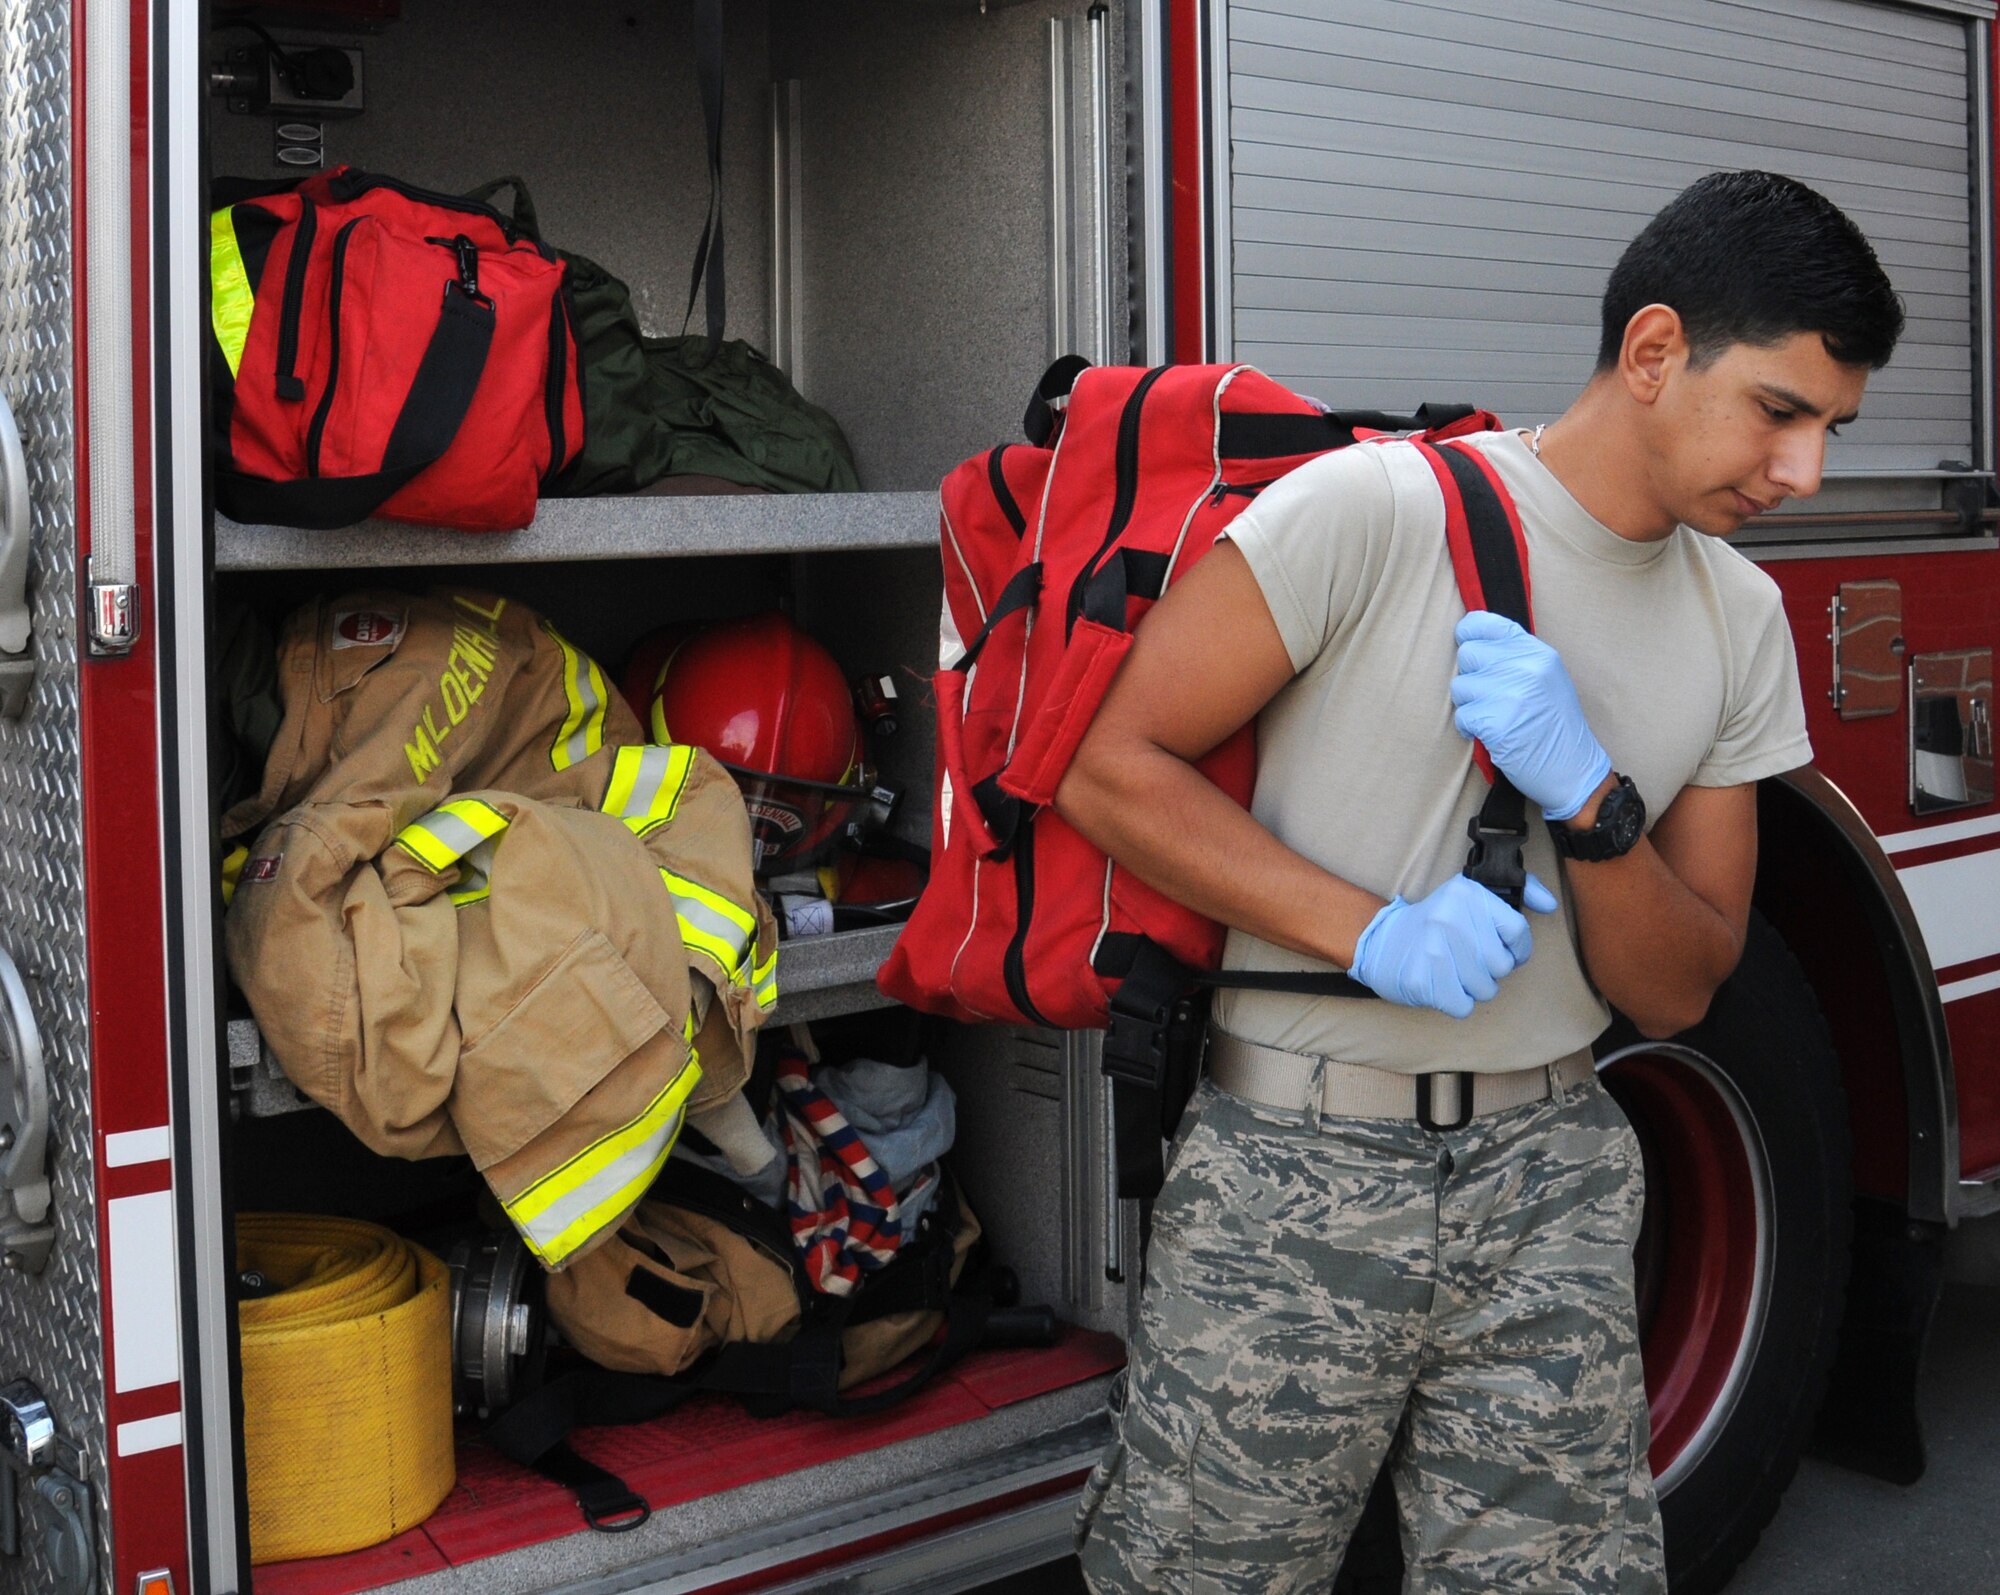 U.S. Air Force Airman 1st Class Jacob Sandoval, 100th Civil Engineer Squadron fire protection journeyman from Pleasanton, Texas, removes a medical bag for inspection as part of the daily equipment checkout Sept. 10, 2014, at the fire department on RAF Mildenhall, England. Firefighters provide basic life support on RAF Mildenhall, then patients are transported to RAF Lakenheath for further treatment if required. (U.S. Air Force photo/Gina Randall/Released)